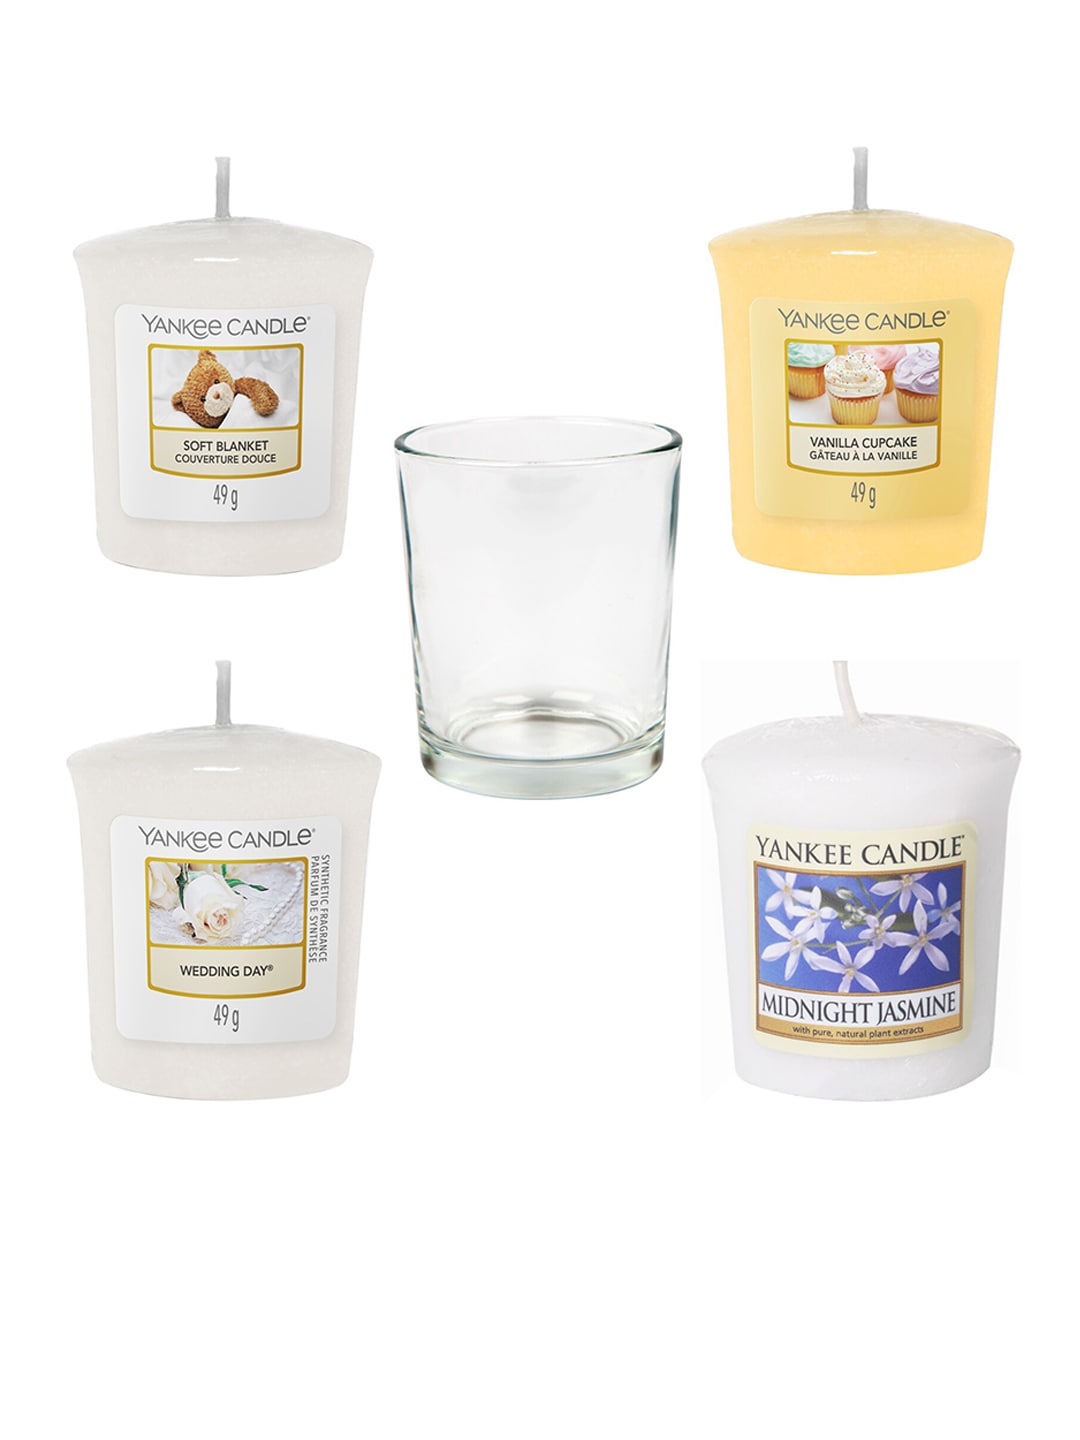 YANKEE CANDLE Set of 4 Classic Votive Scented Candles with Votive Holder Price in India